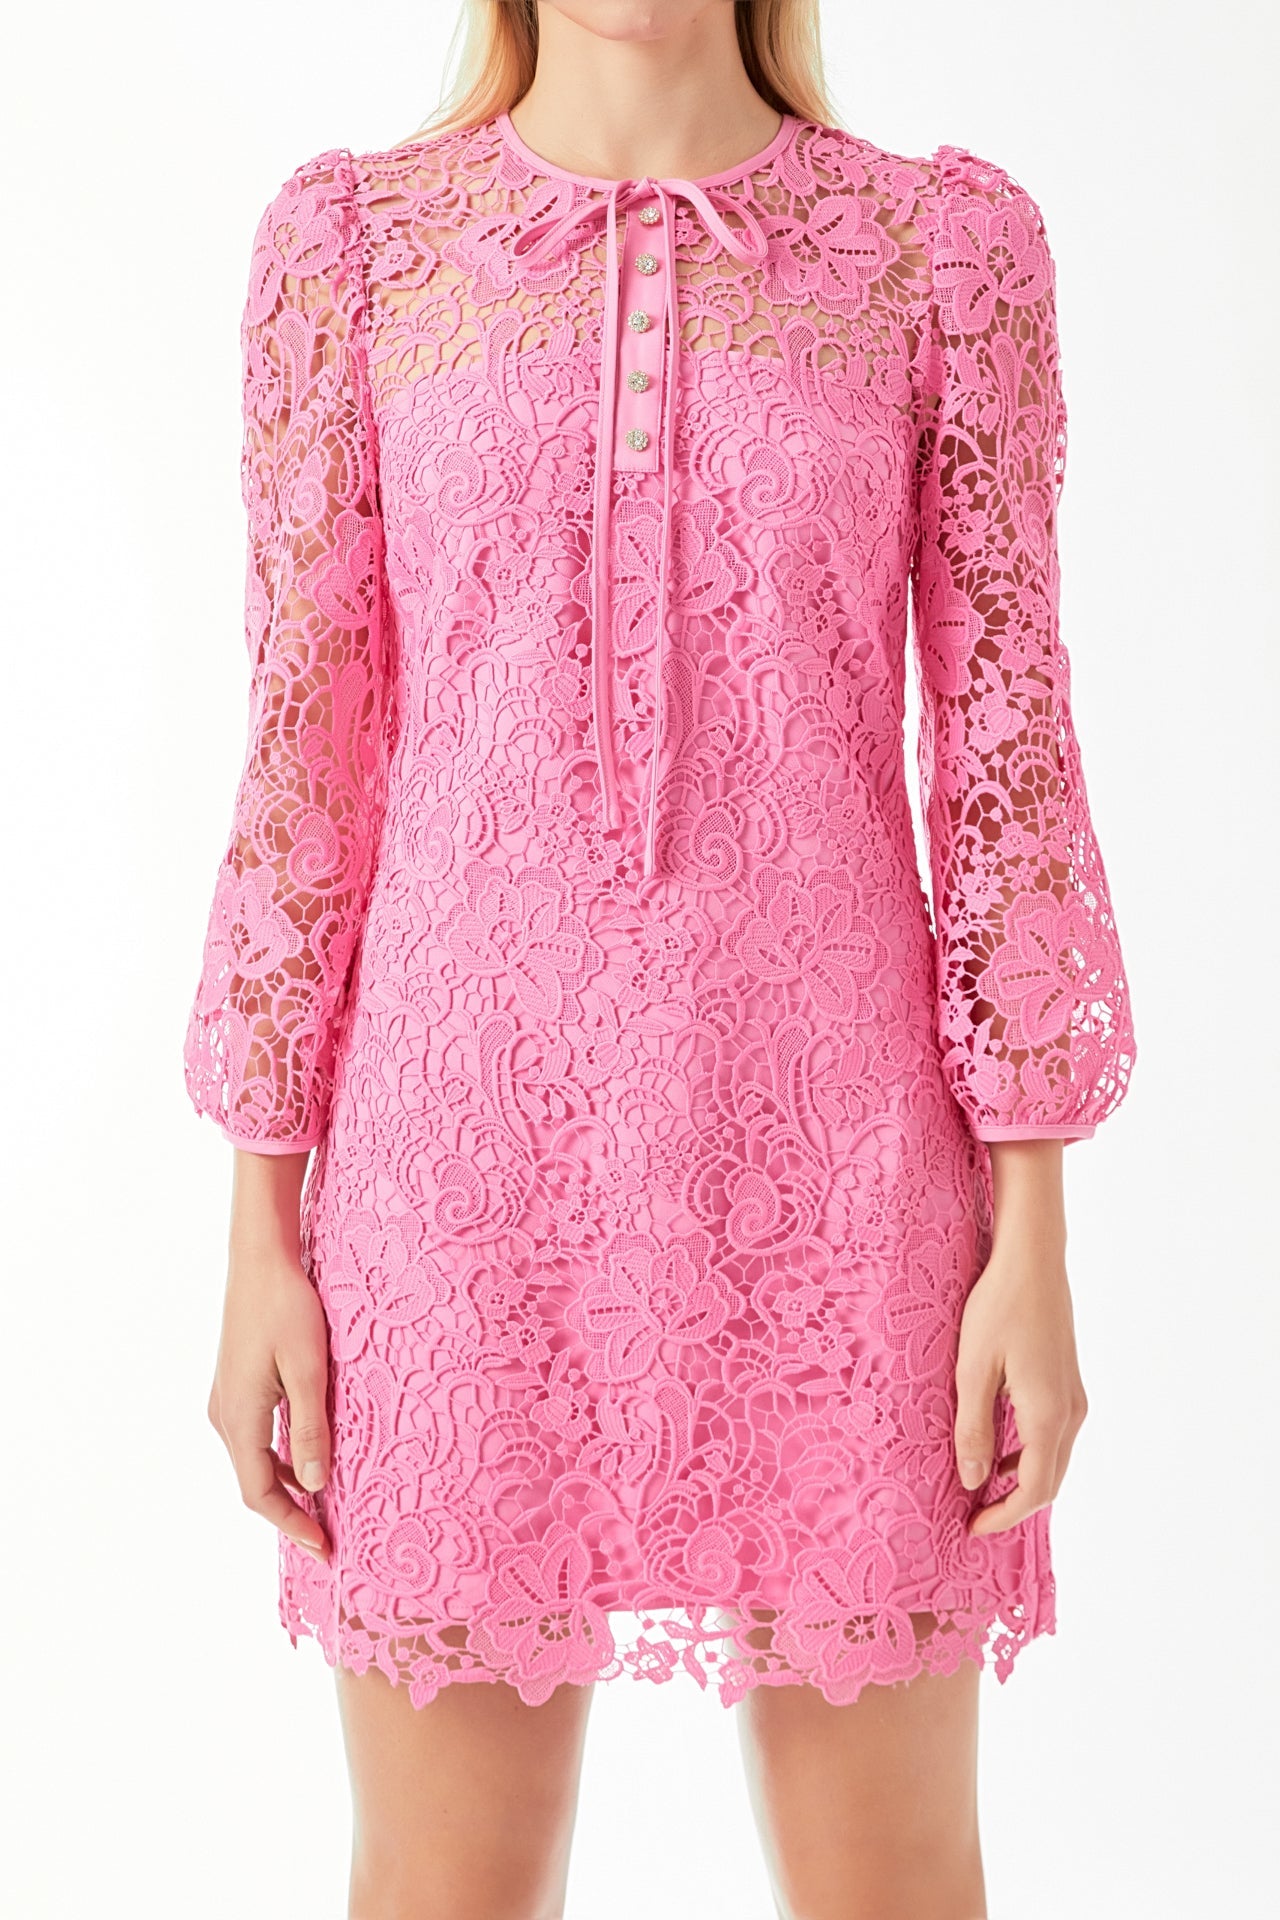 Aubree Lace Mini Dress in Pink by endless rose 